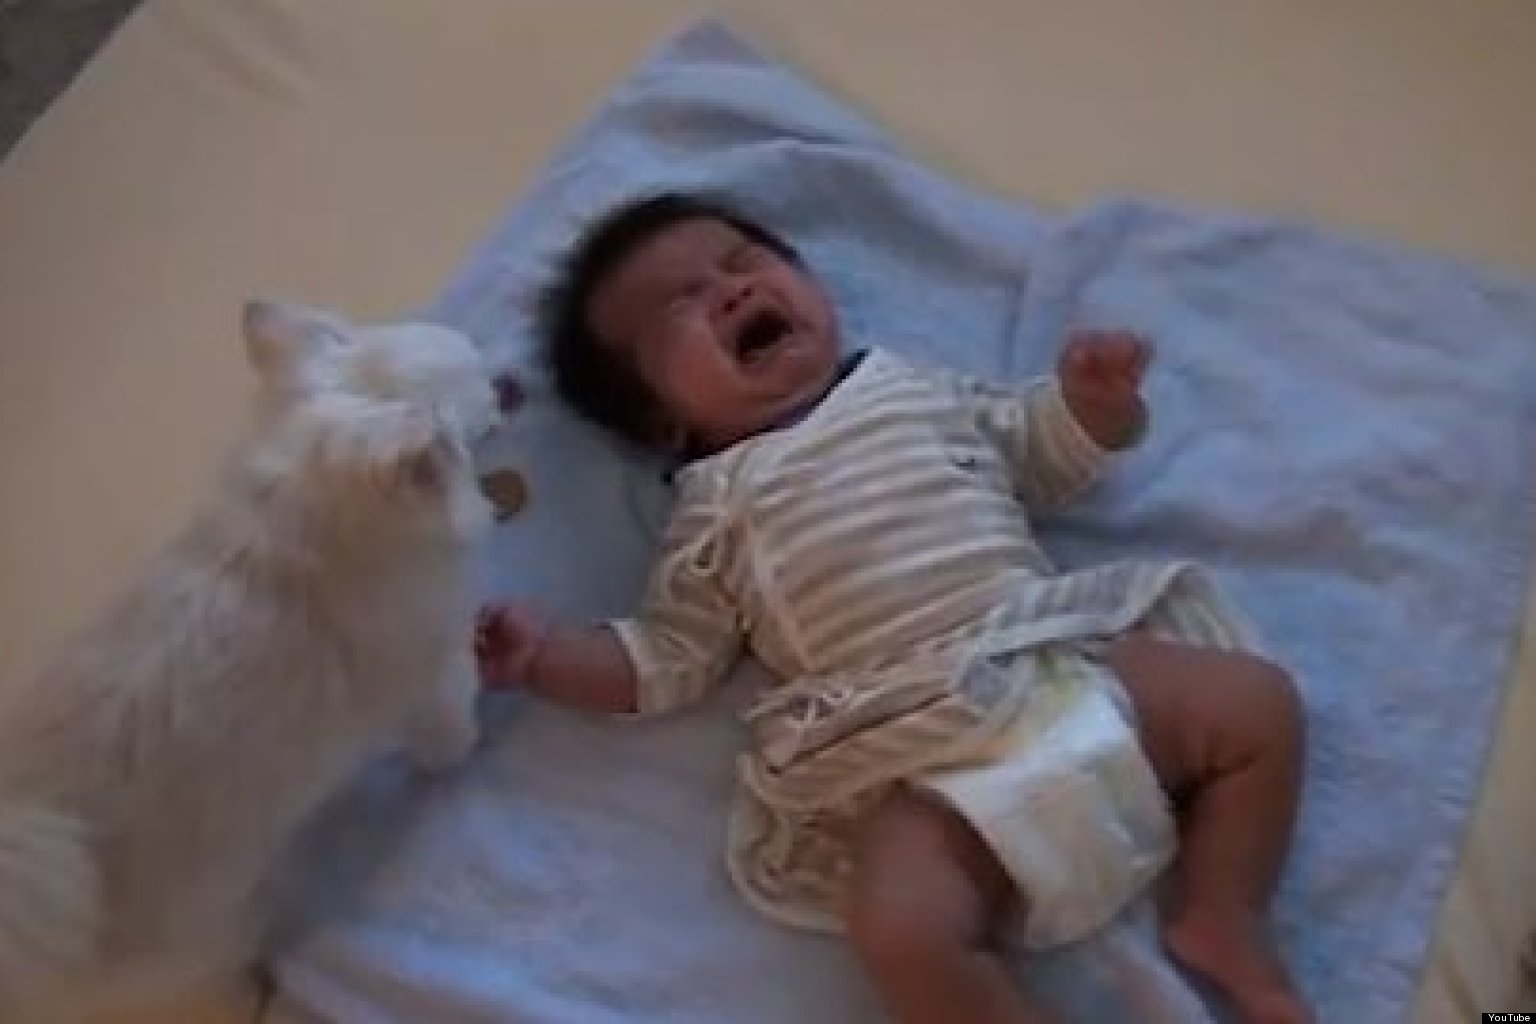 Dog Comforts Crying Baby With A Cookie (VIDEO)